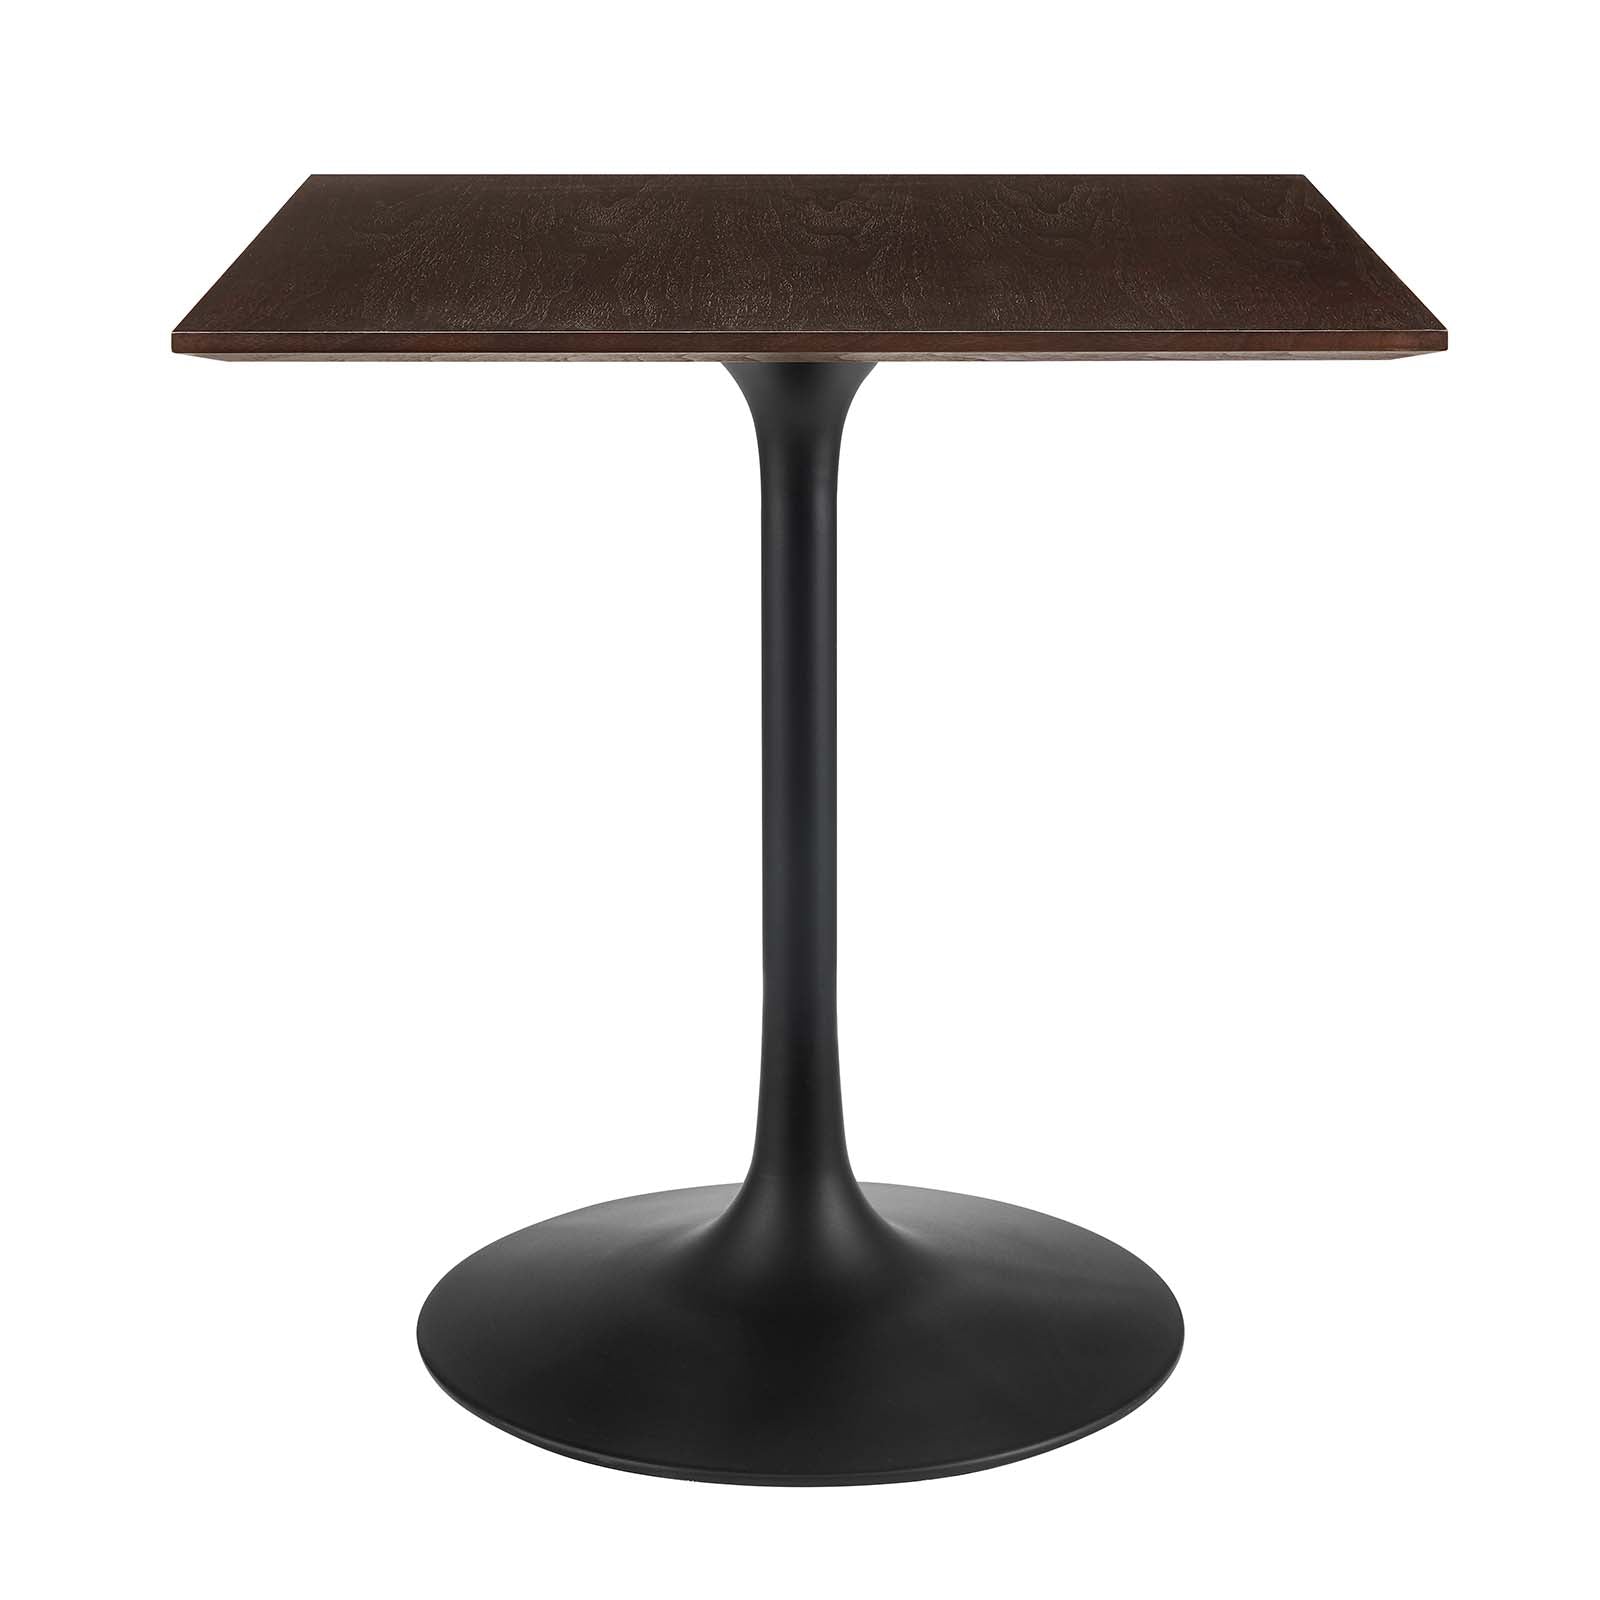 Modway Dining Tables - Lippa-28"-Square-Wood-Grain-Square-Dining-Table-Black-Cherry-Walnut